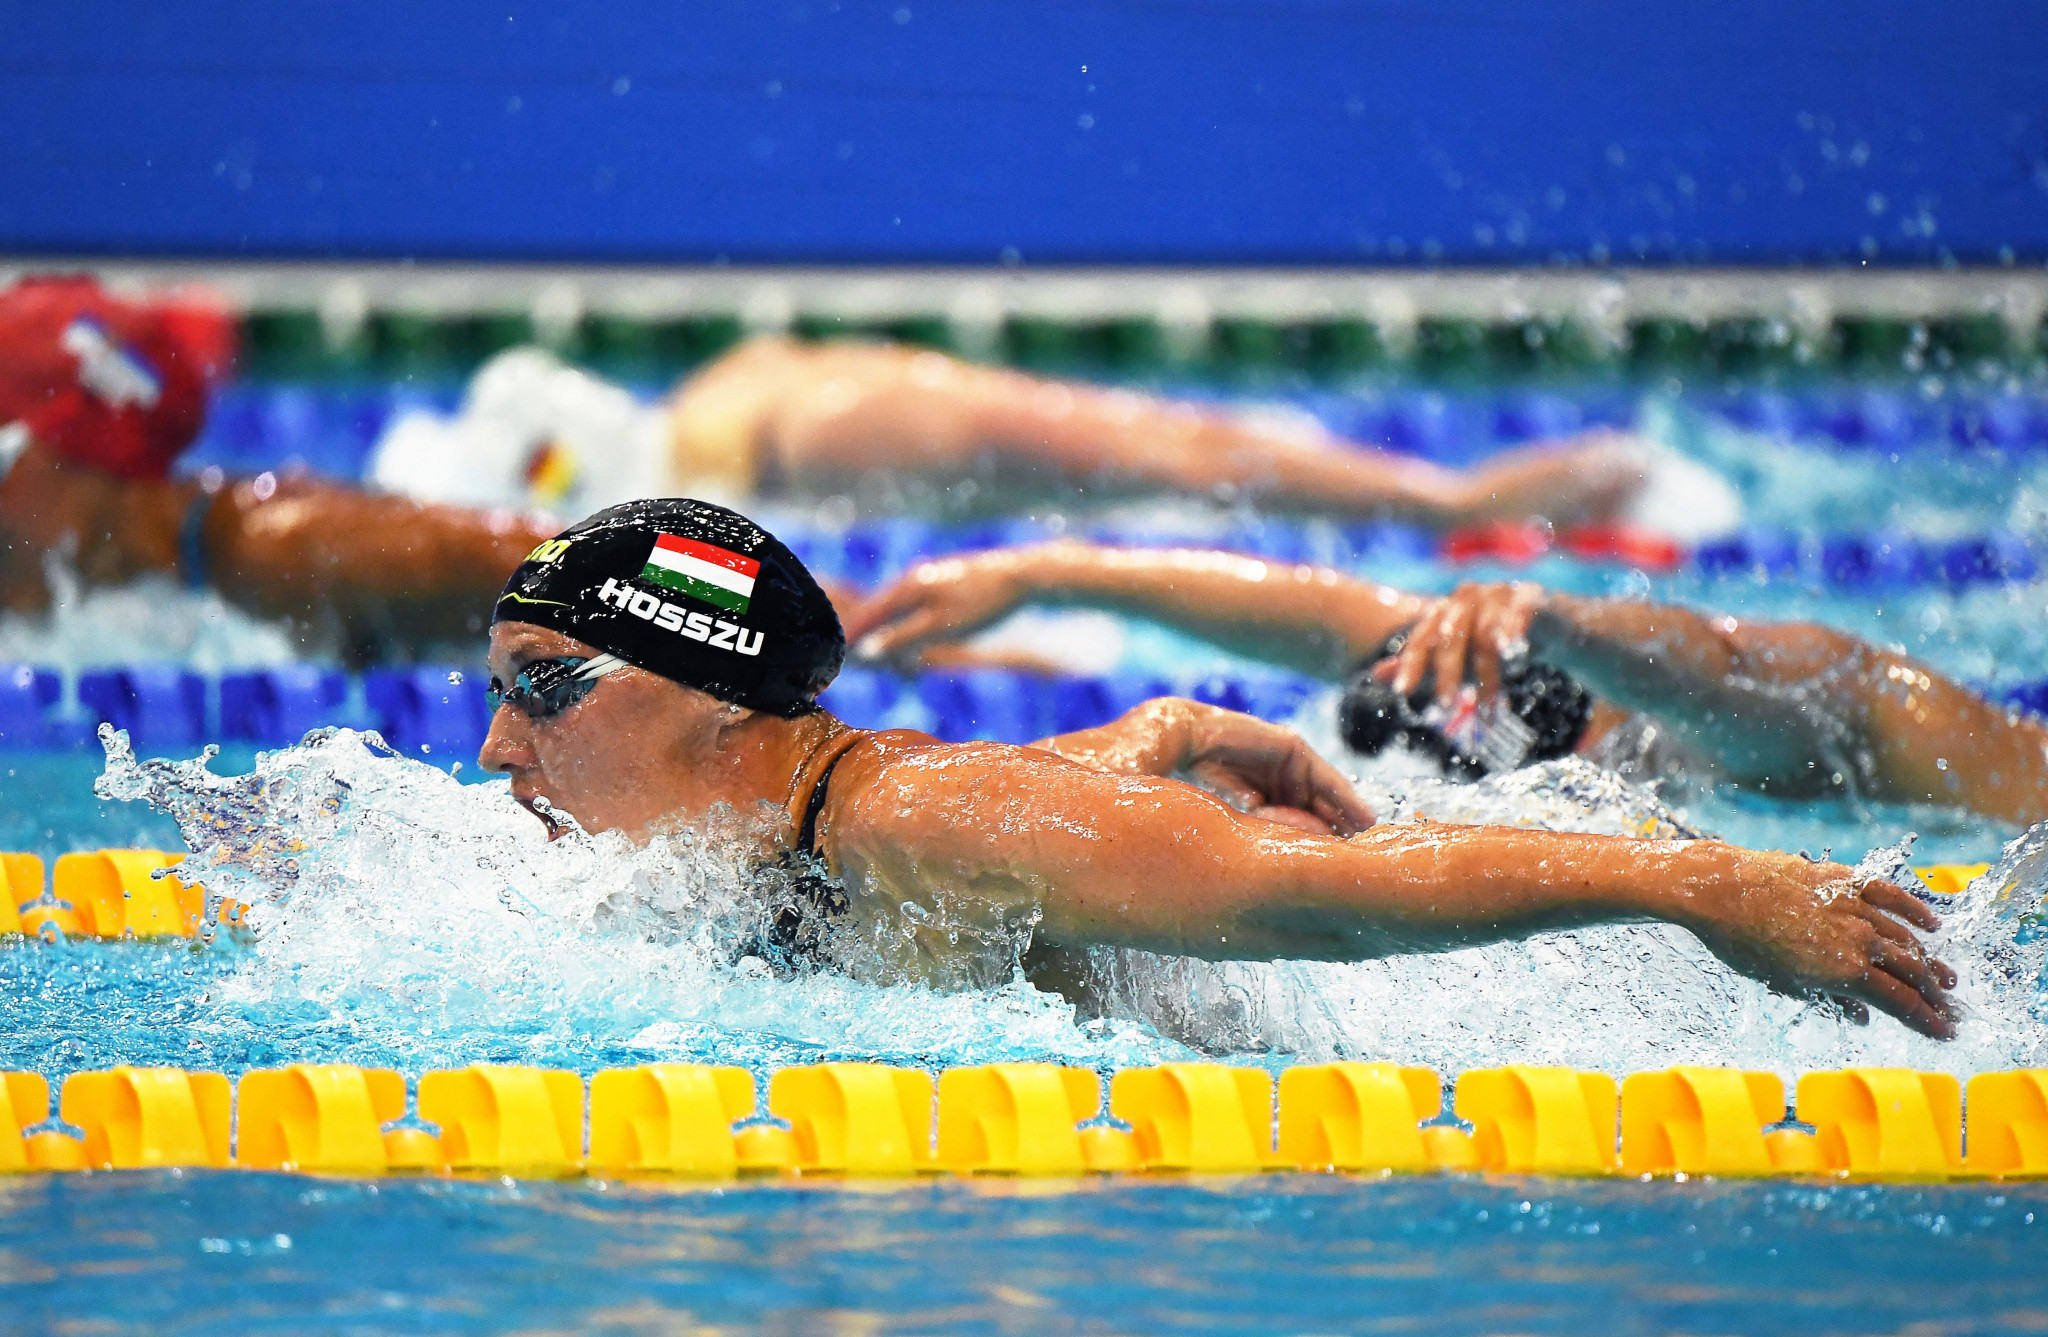 Olympic 400m medley champion Katinka Hosszú was more than two seconds clear of the field in the final ©Getty Images